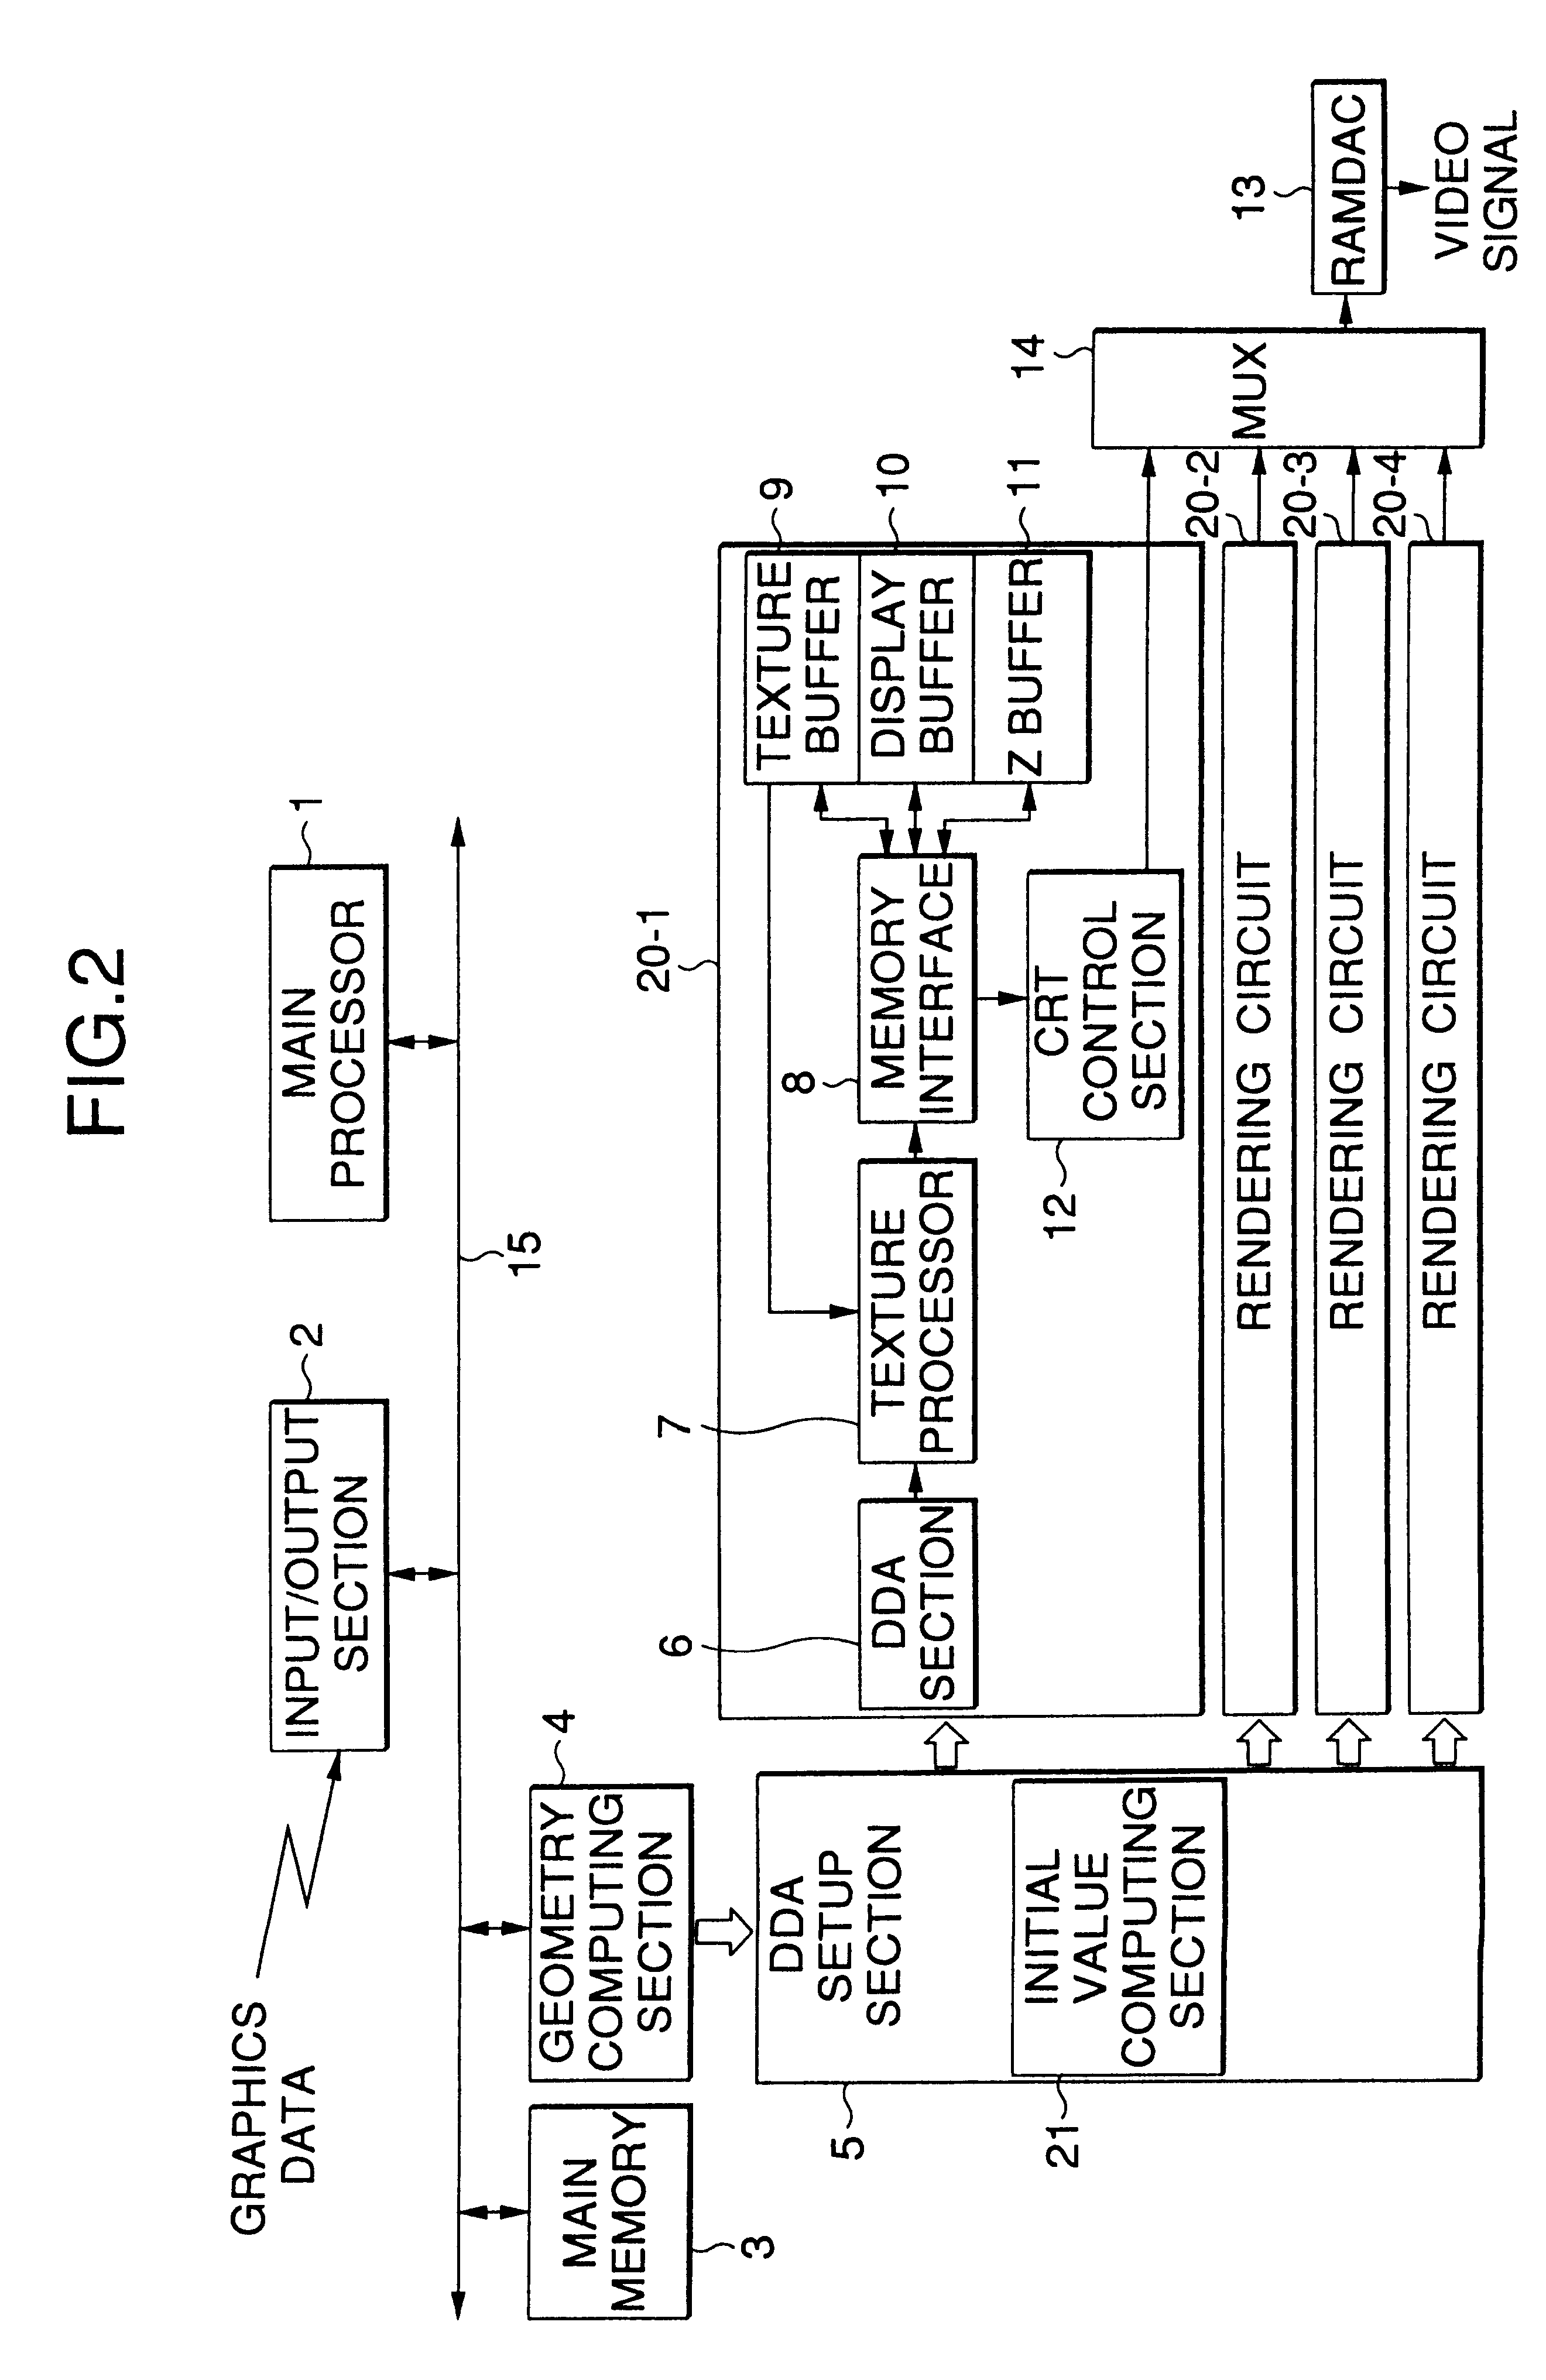 Apparatus and method for parallel rendering of image pixels